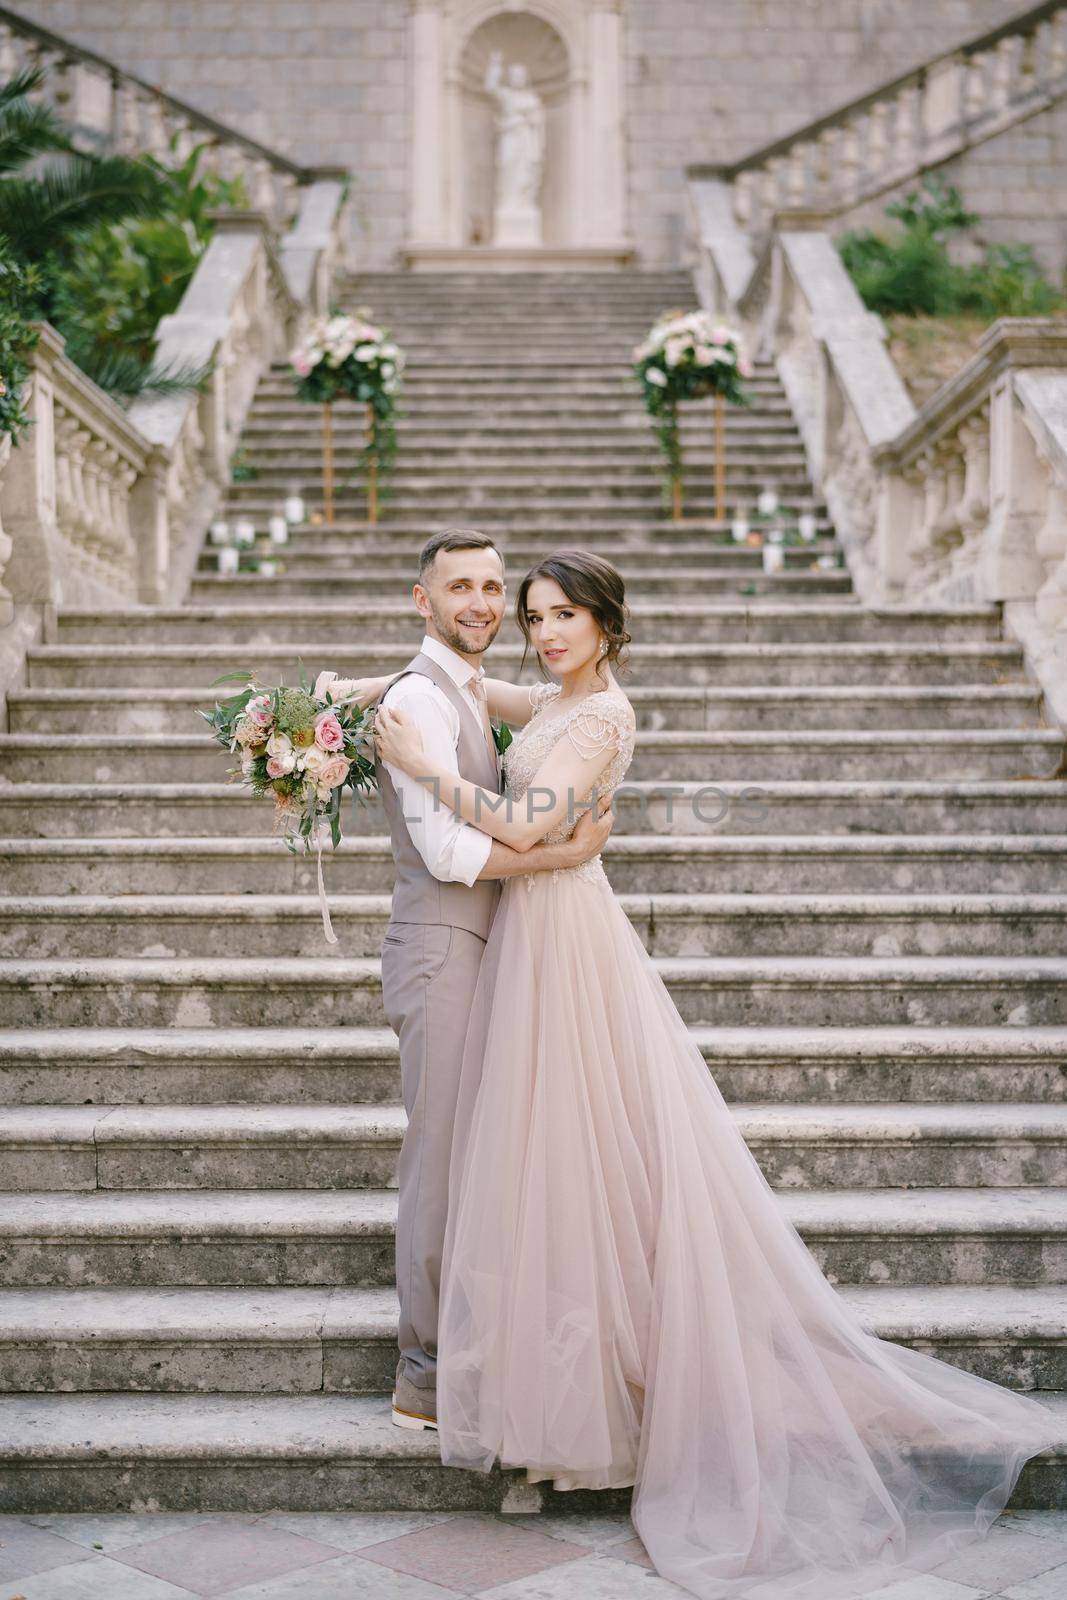 Bride is embracing groom on the stone steps near the old villa by Nadtochiy